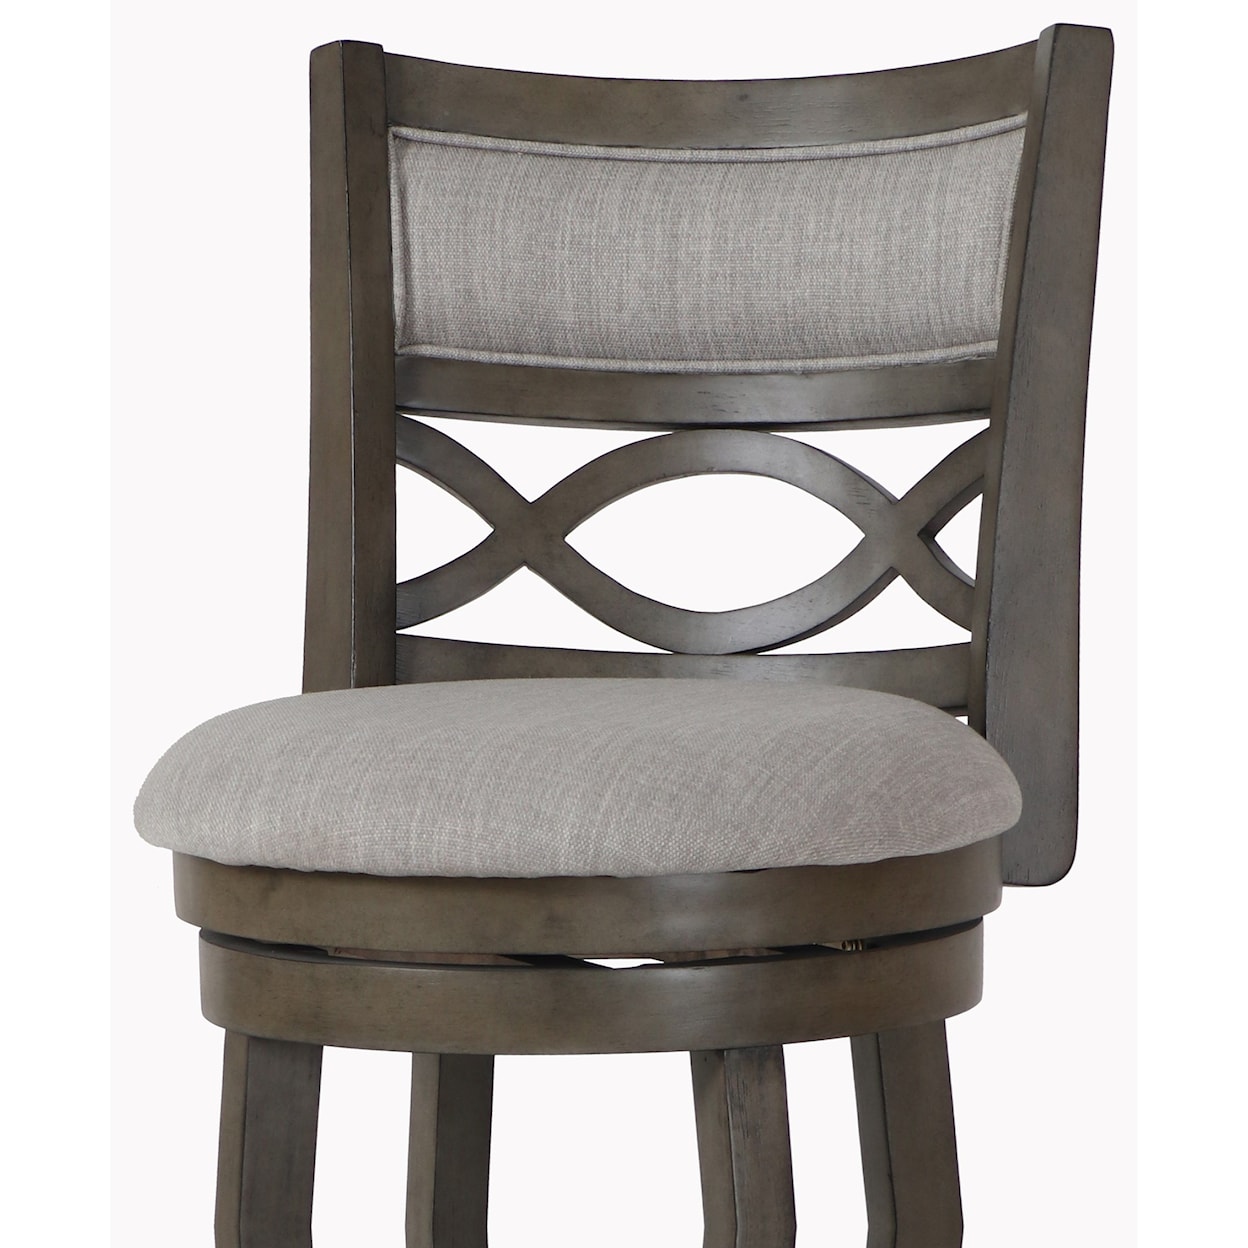 New Classic Furniture Manchester 29" Barstool with Fabric Seat